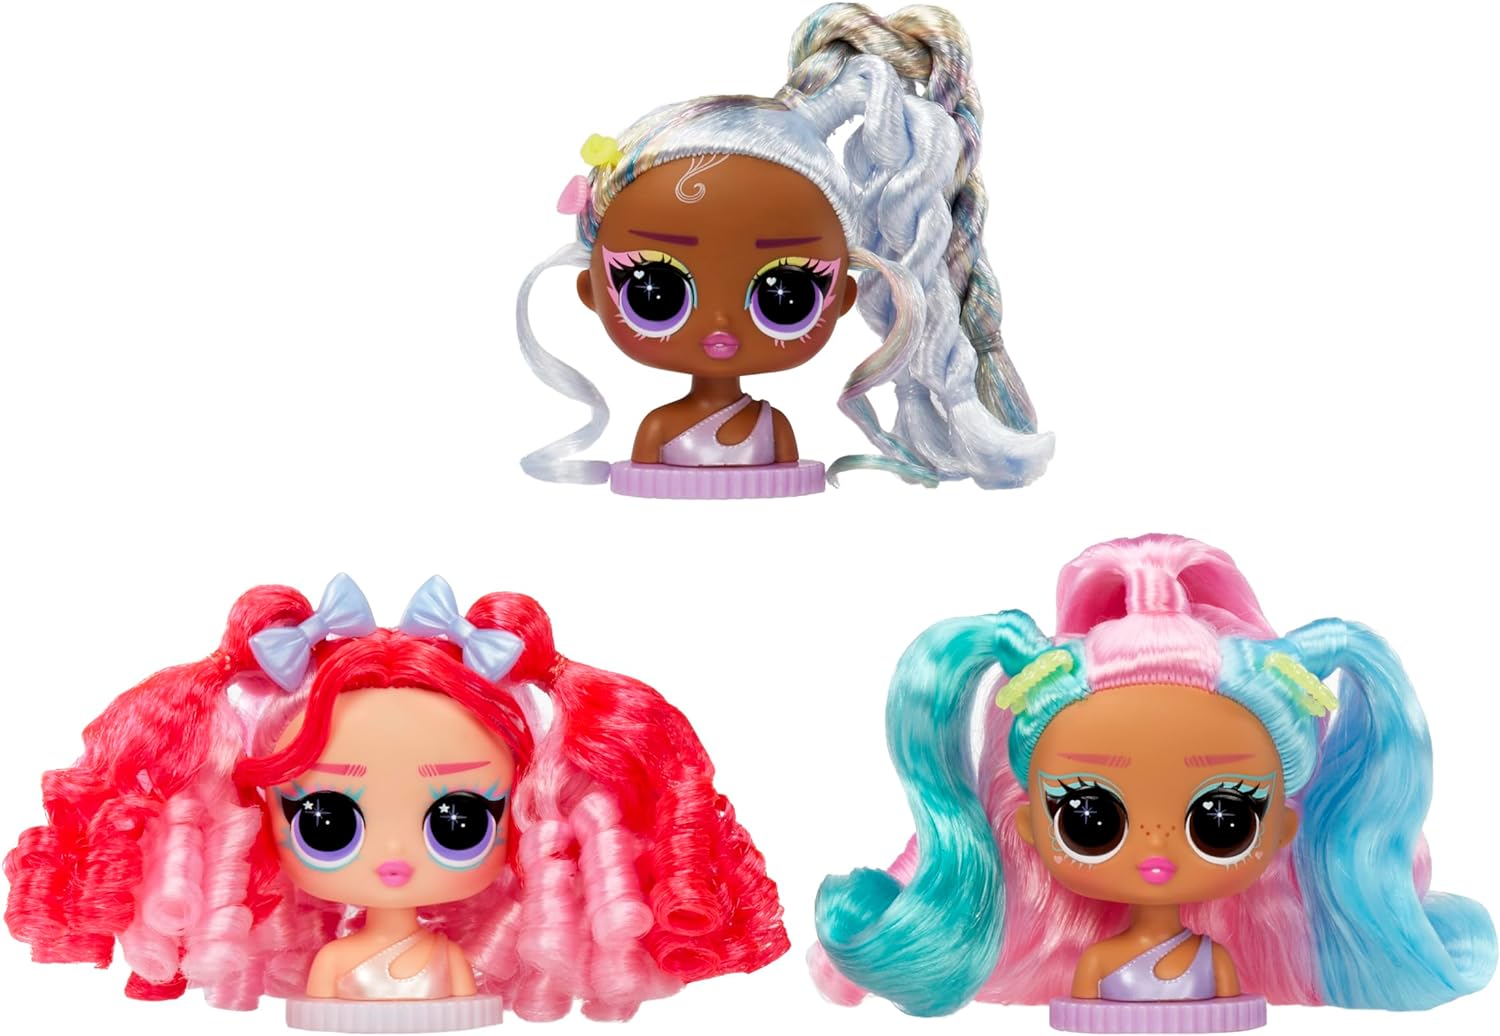 L.O.L. Surprise! Tweens Surprise Swap Styling Heads Including Fabulous Hair Accessories and Gorgeous Hair – Great Gift for Kids Ages 4+ (Assorted items)